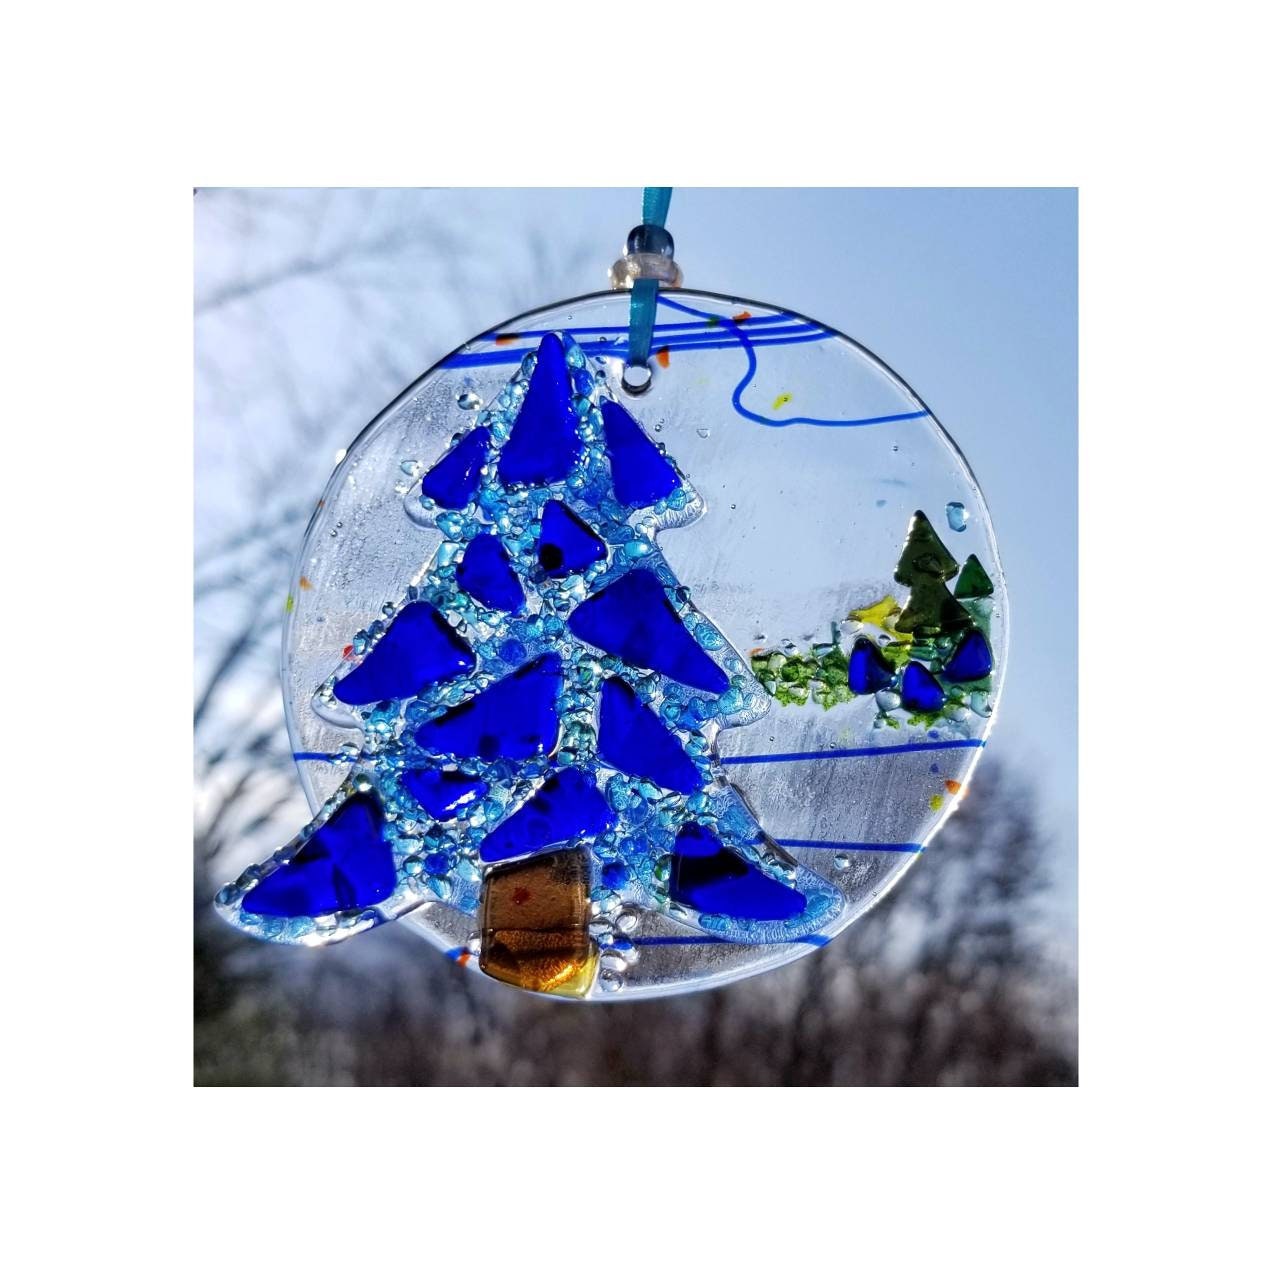 Fused Glass Tree, sun catcher hanging. Cobalt, light blues & clear. Crushed frit with confetti glass are kiln formed. Gift for tree lovers.